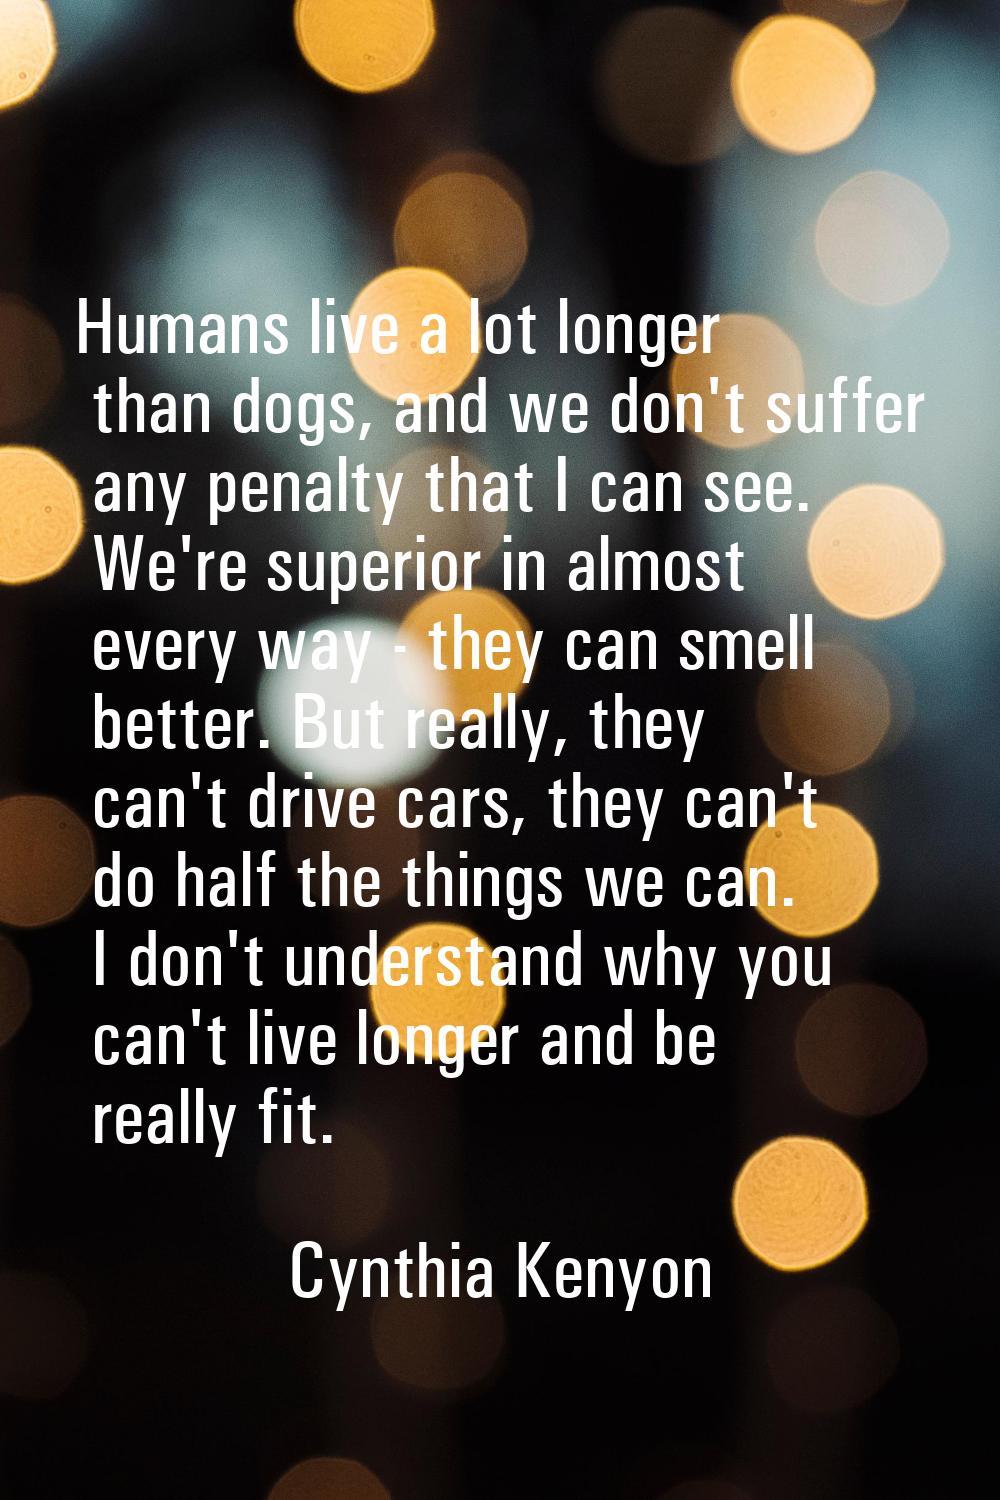 Humans live a lot longer than dogs, and we don't suffer any penalty that I can see. We're superior 